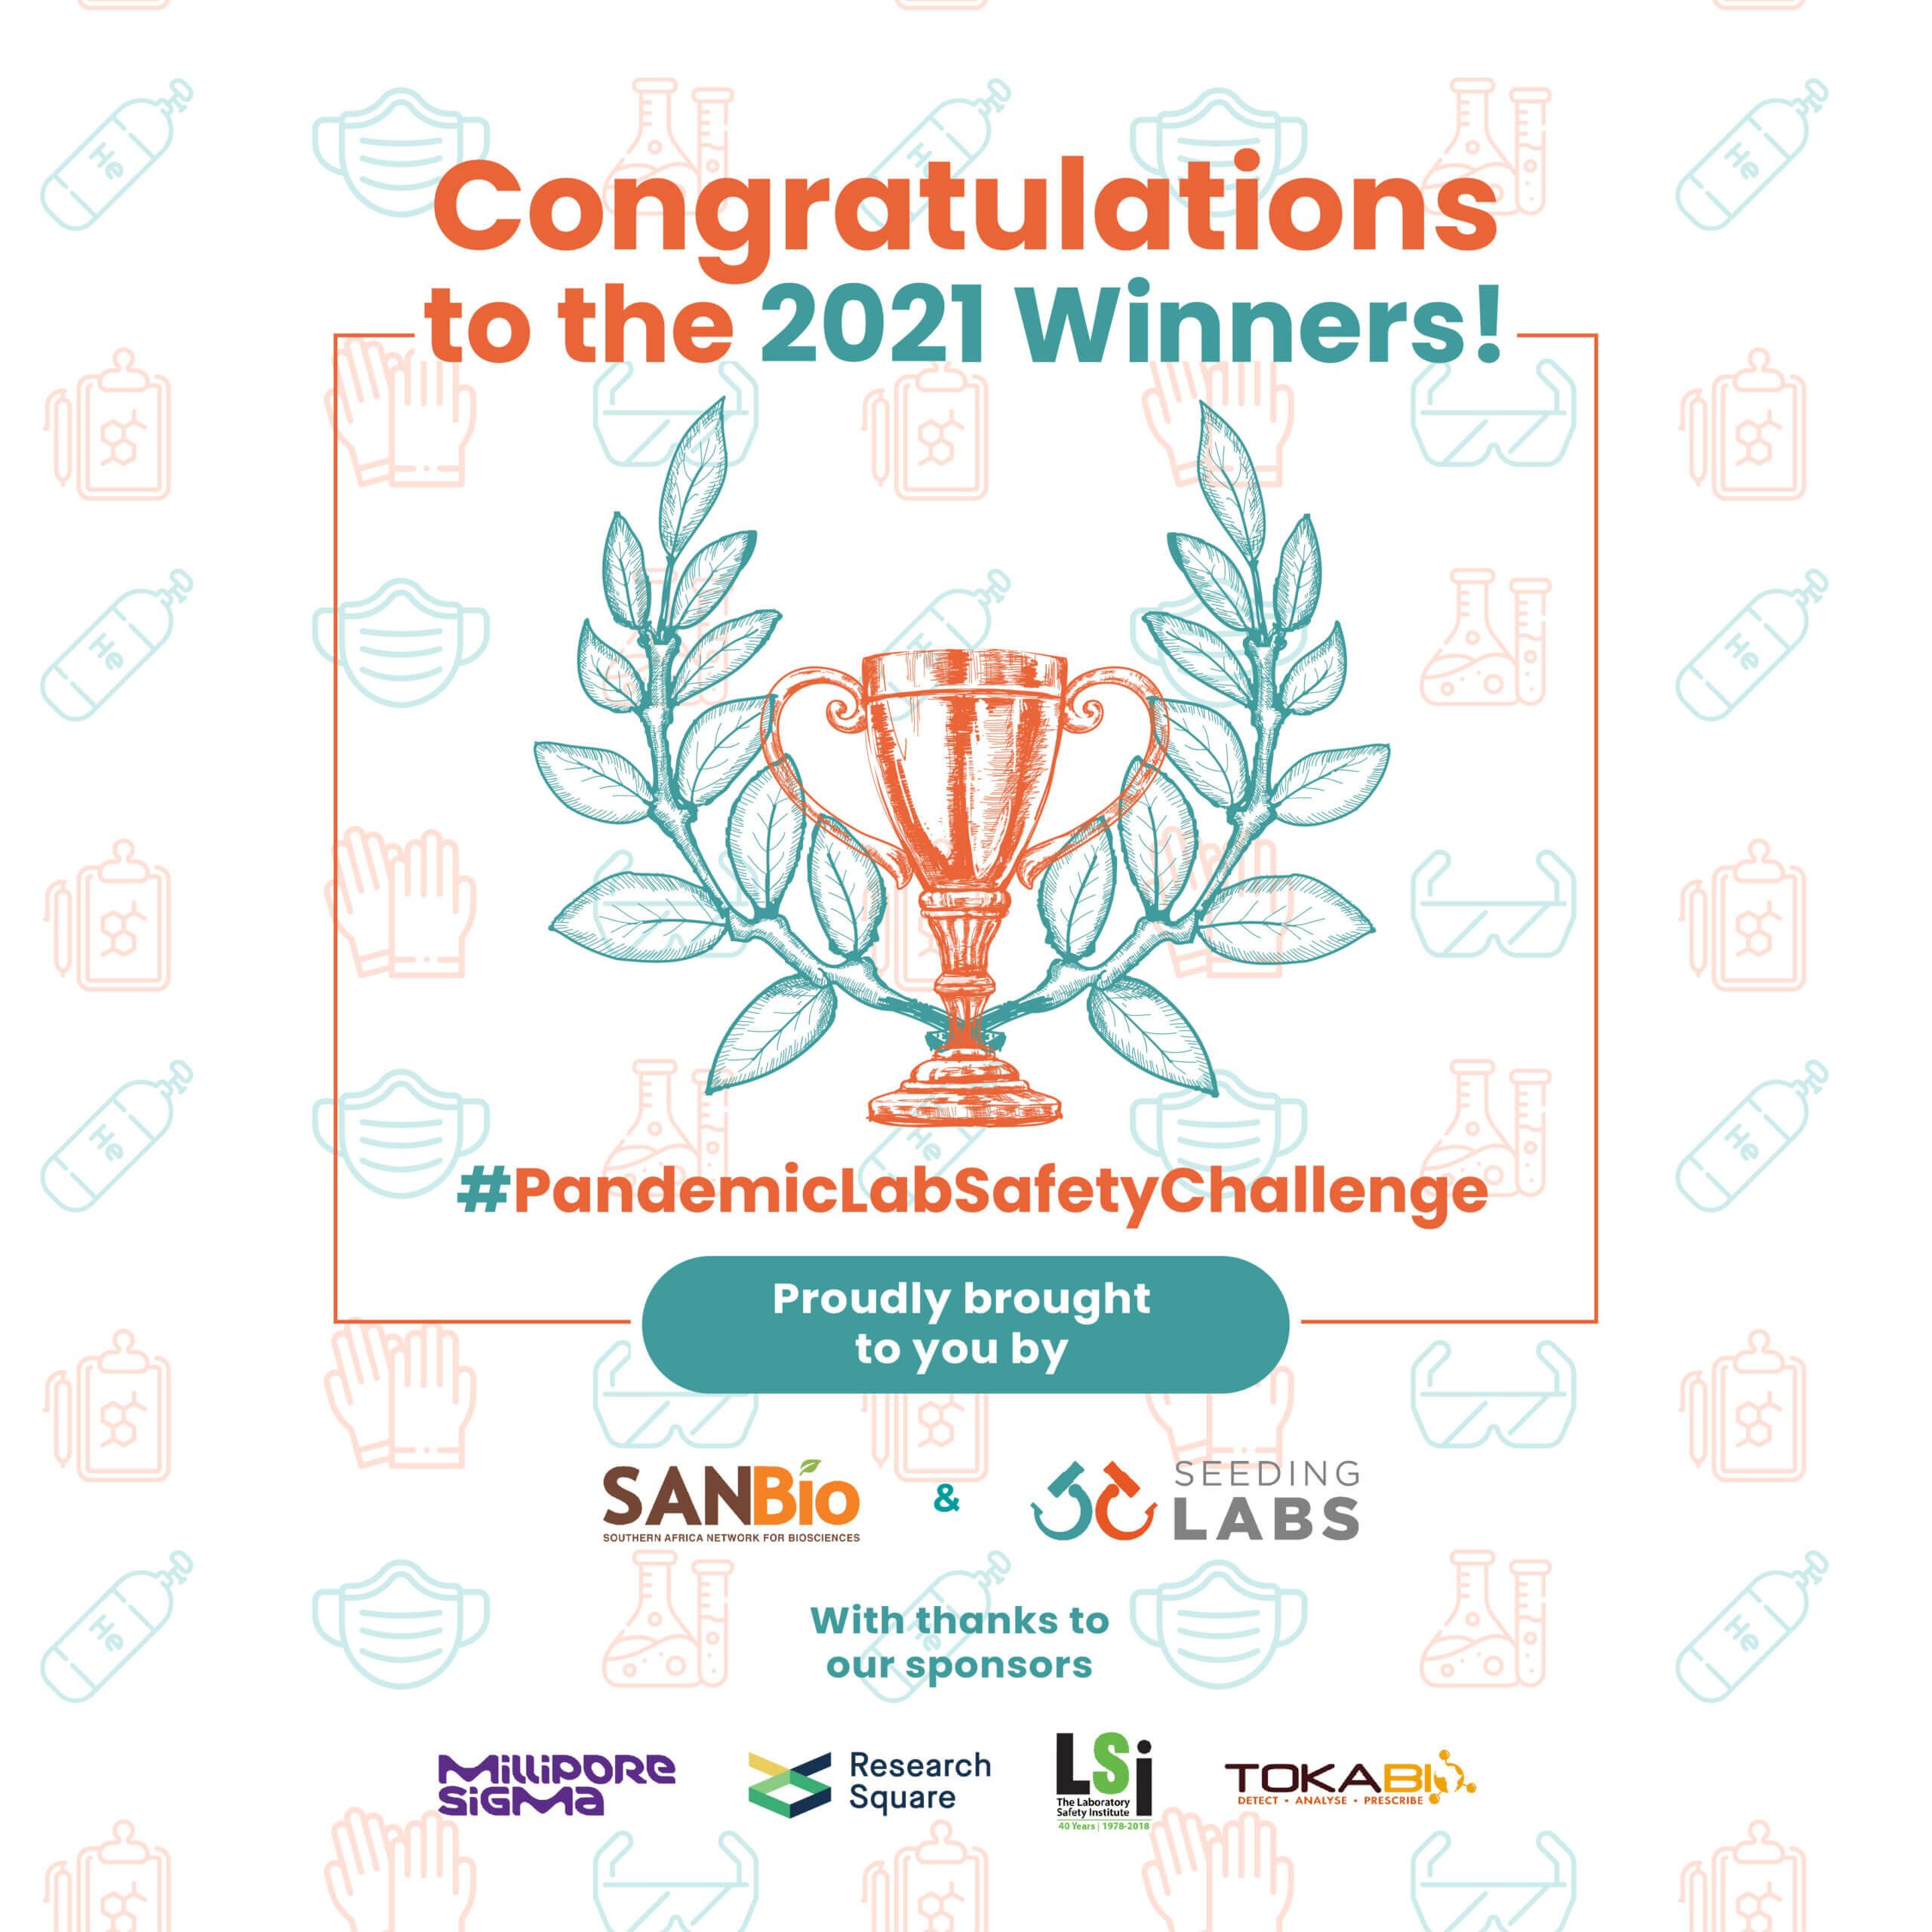 Congratulations to the Pandemic Lab Safety Challenge Winners